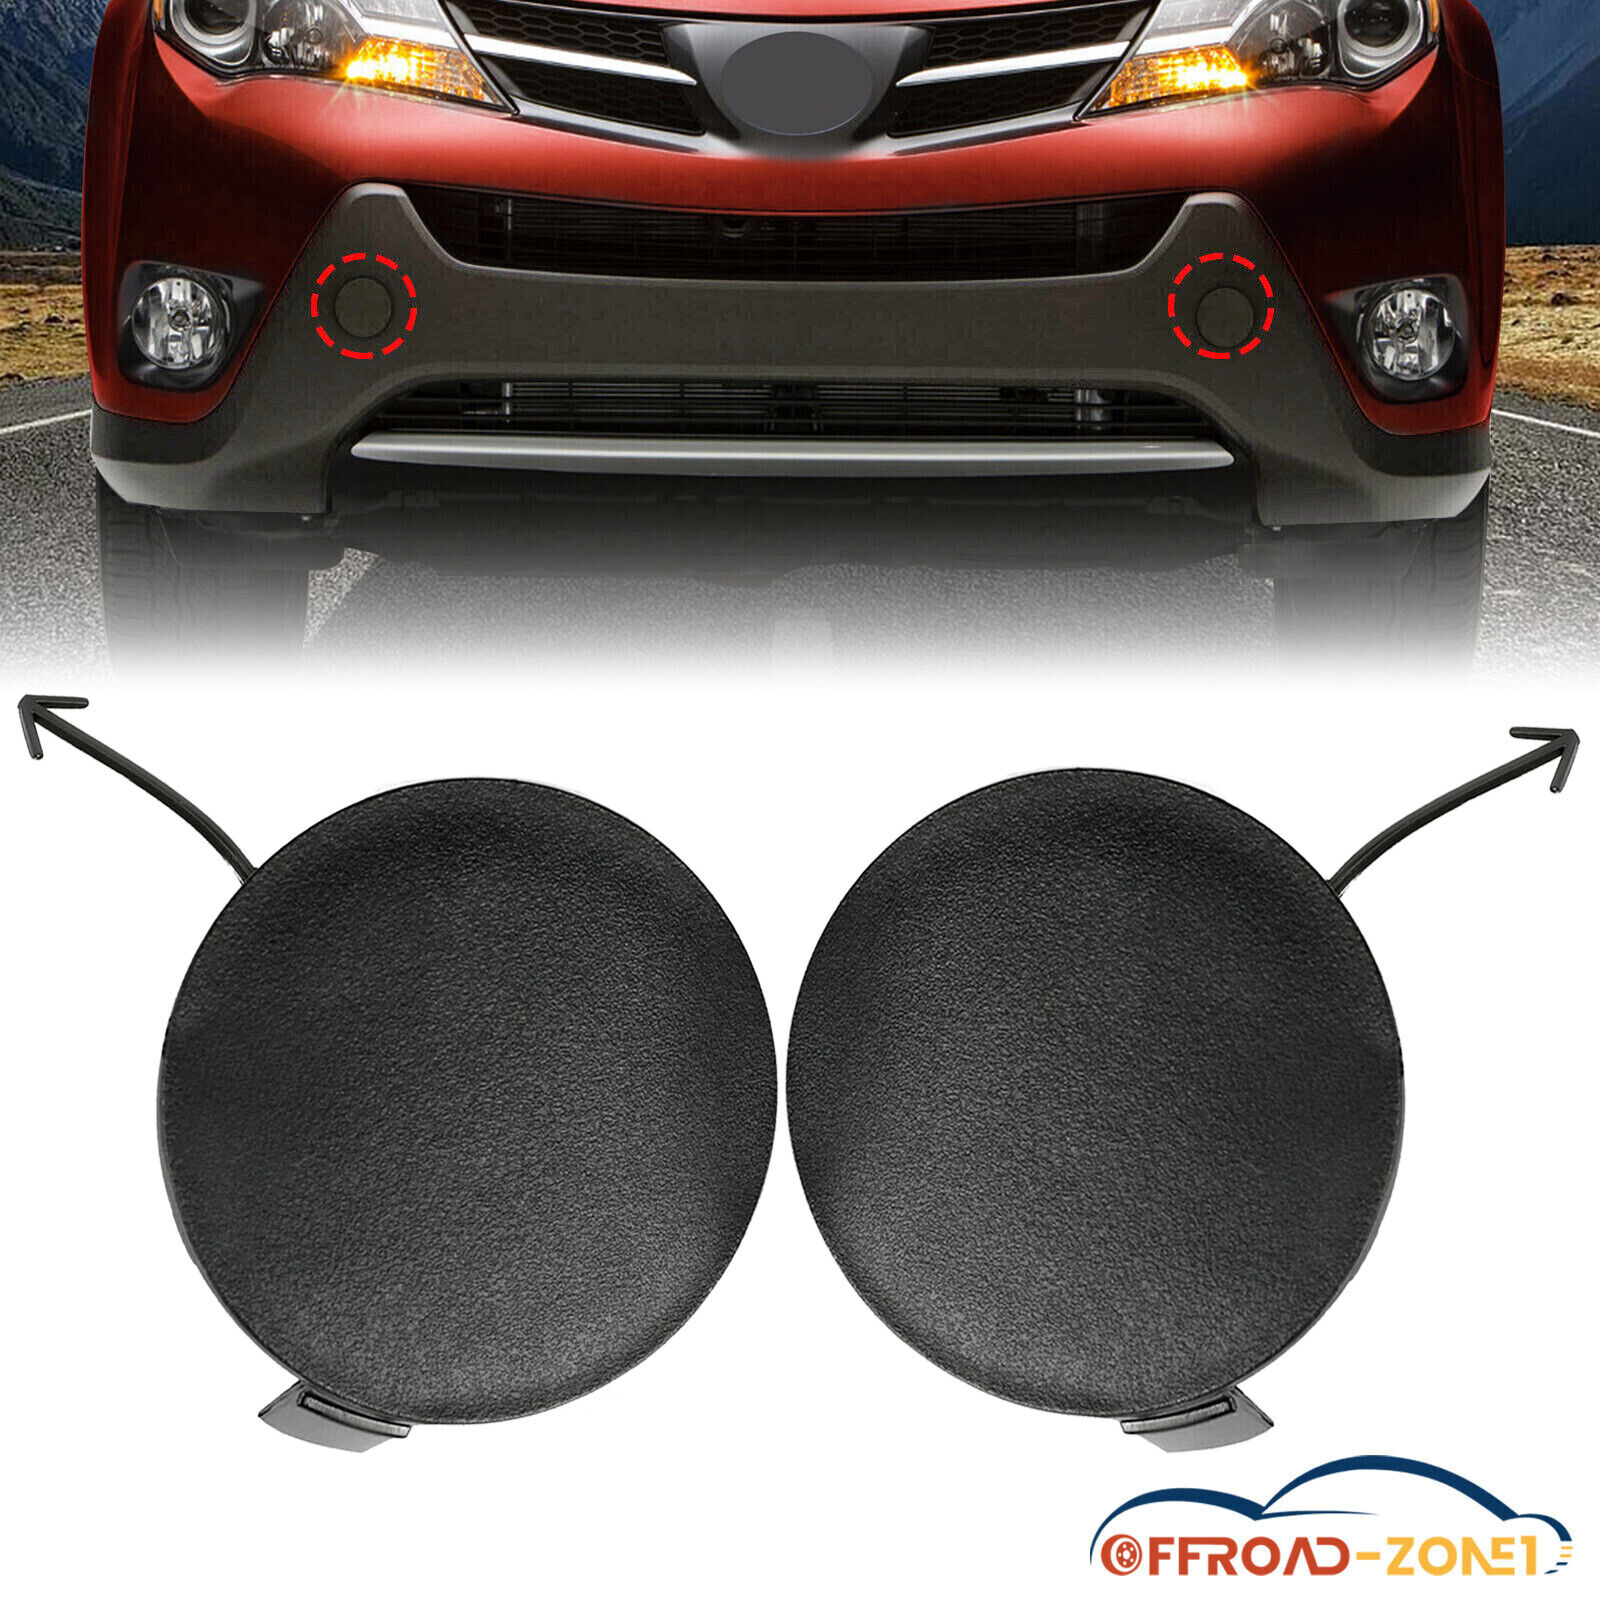 Pair Front Bumper Tow Hook Cover Cap For Toyota RAV4 2013 2014 2015 Left & Right